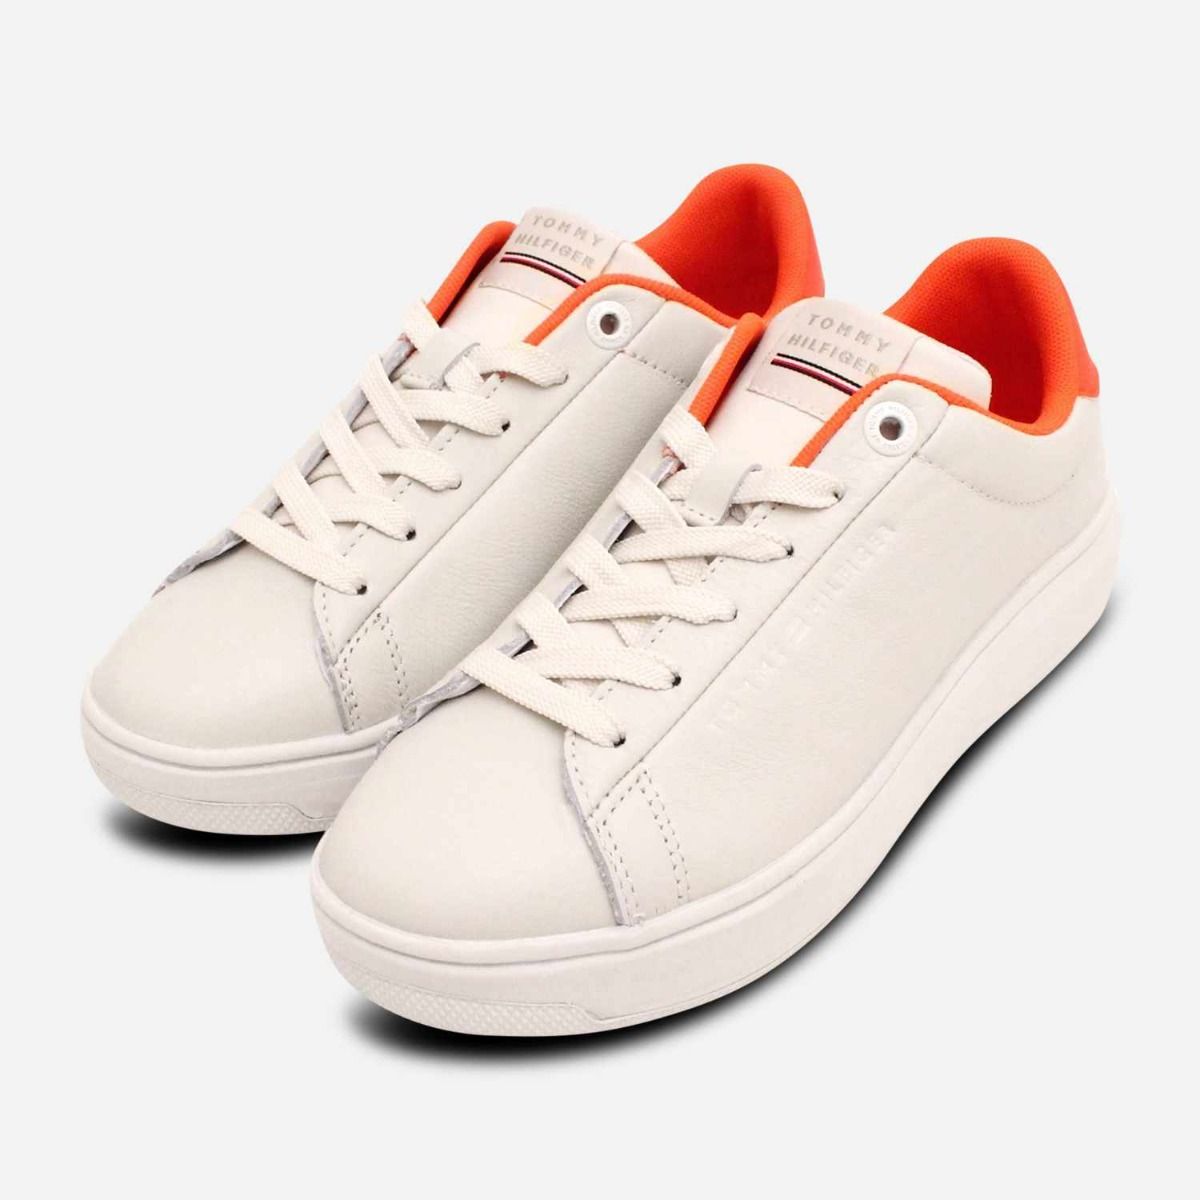 Rally Verhandeling Nat Tommy Hilfiger Premium Leather Sneakers with Coral Heel